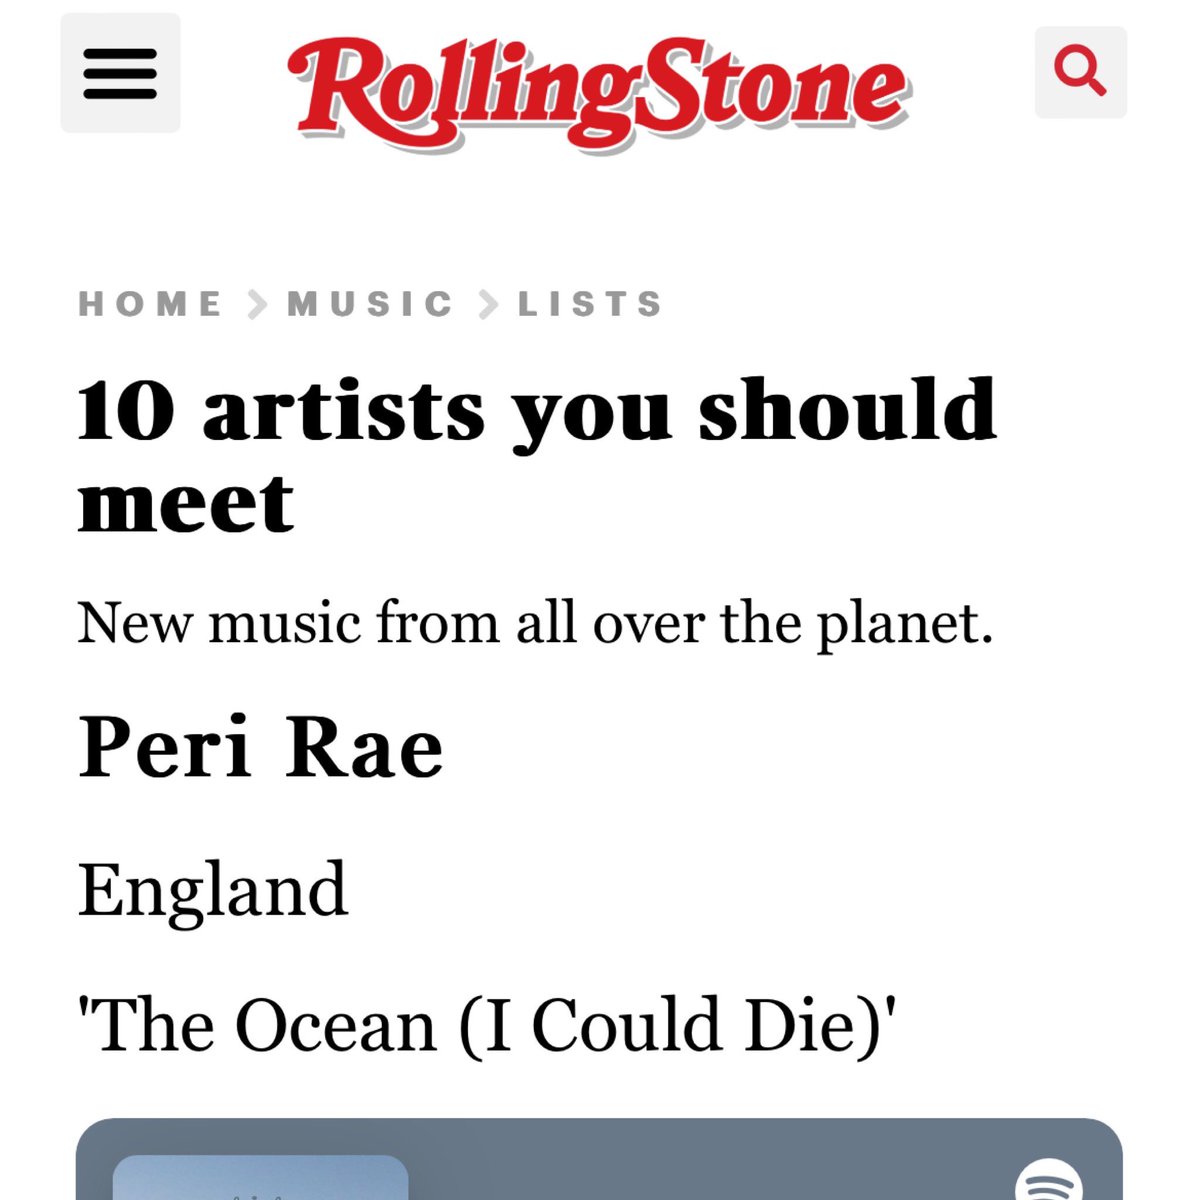 no words just so grateful @RollingStone